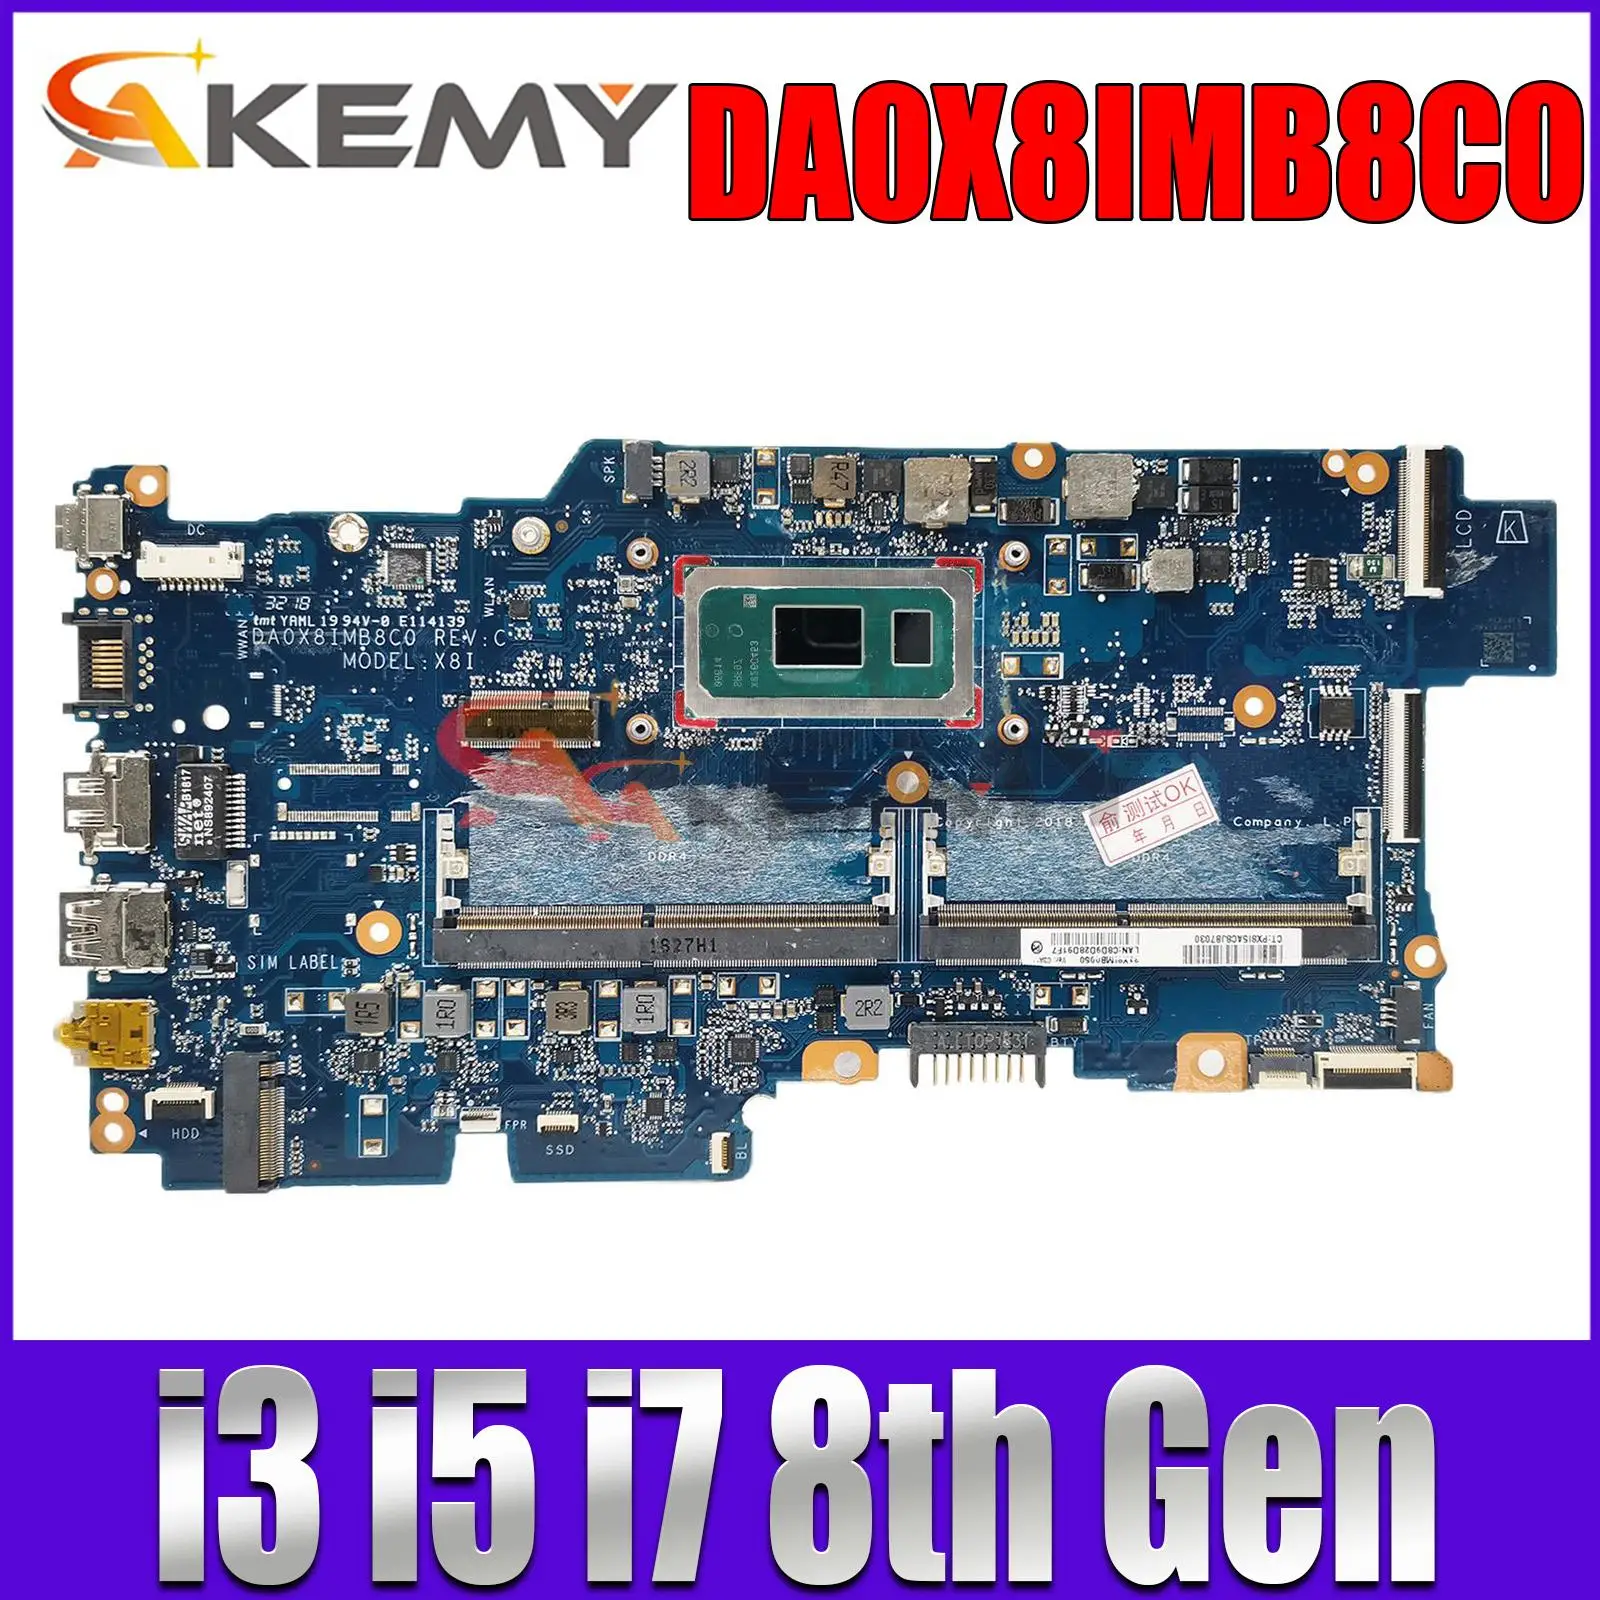 

DA0X8IMB8C0 For HP Probook 430 G6 HSN-Q14C Notebook Mainboard with i3 i5 i7 8th Gen CPU DDR4 Motherboard